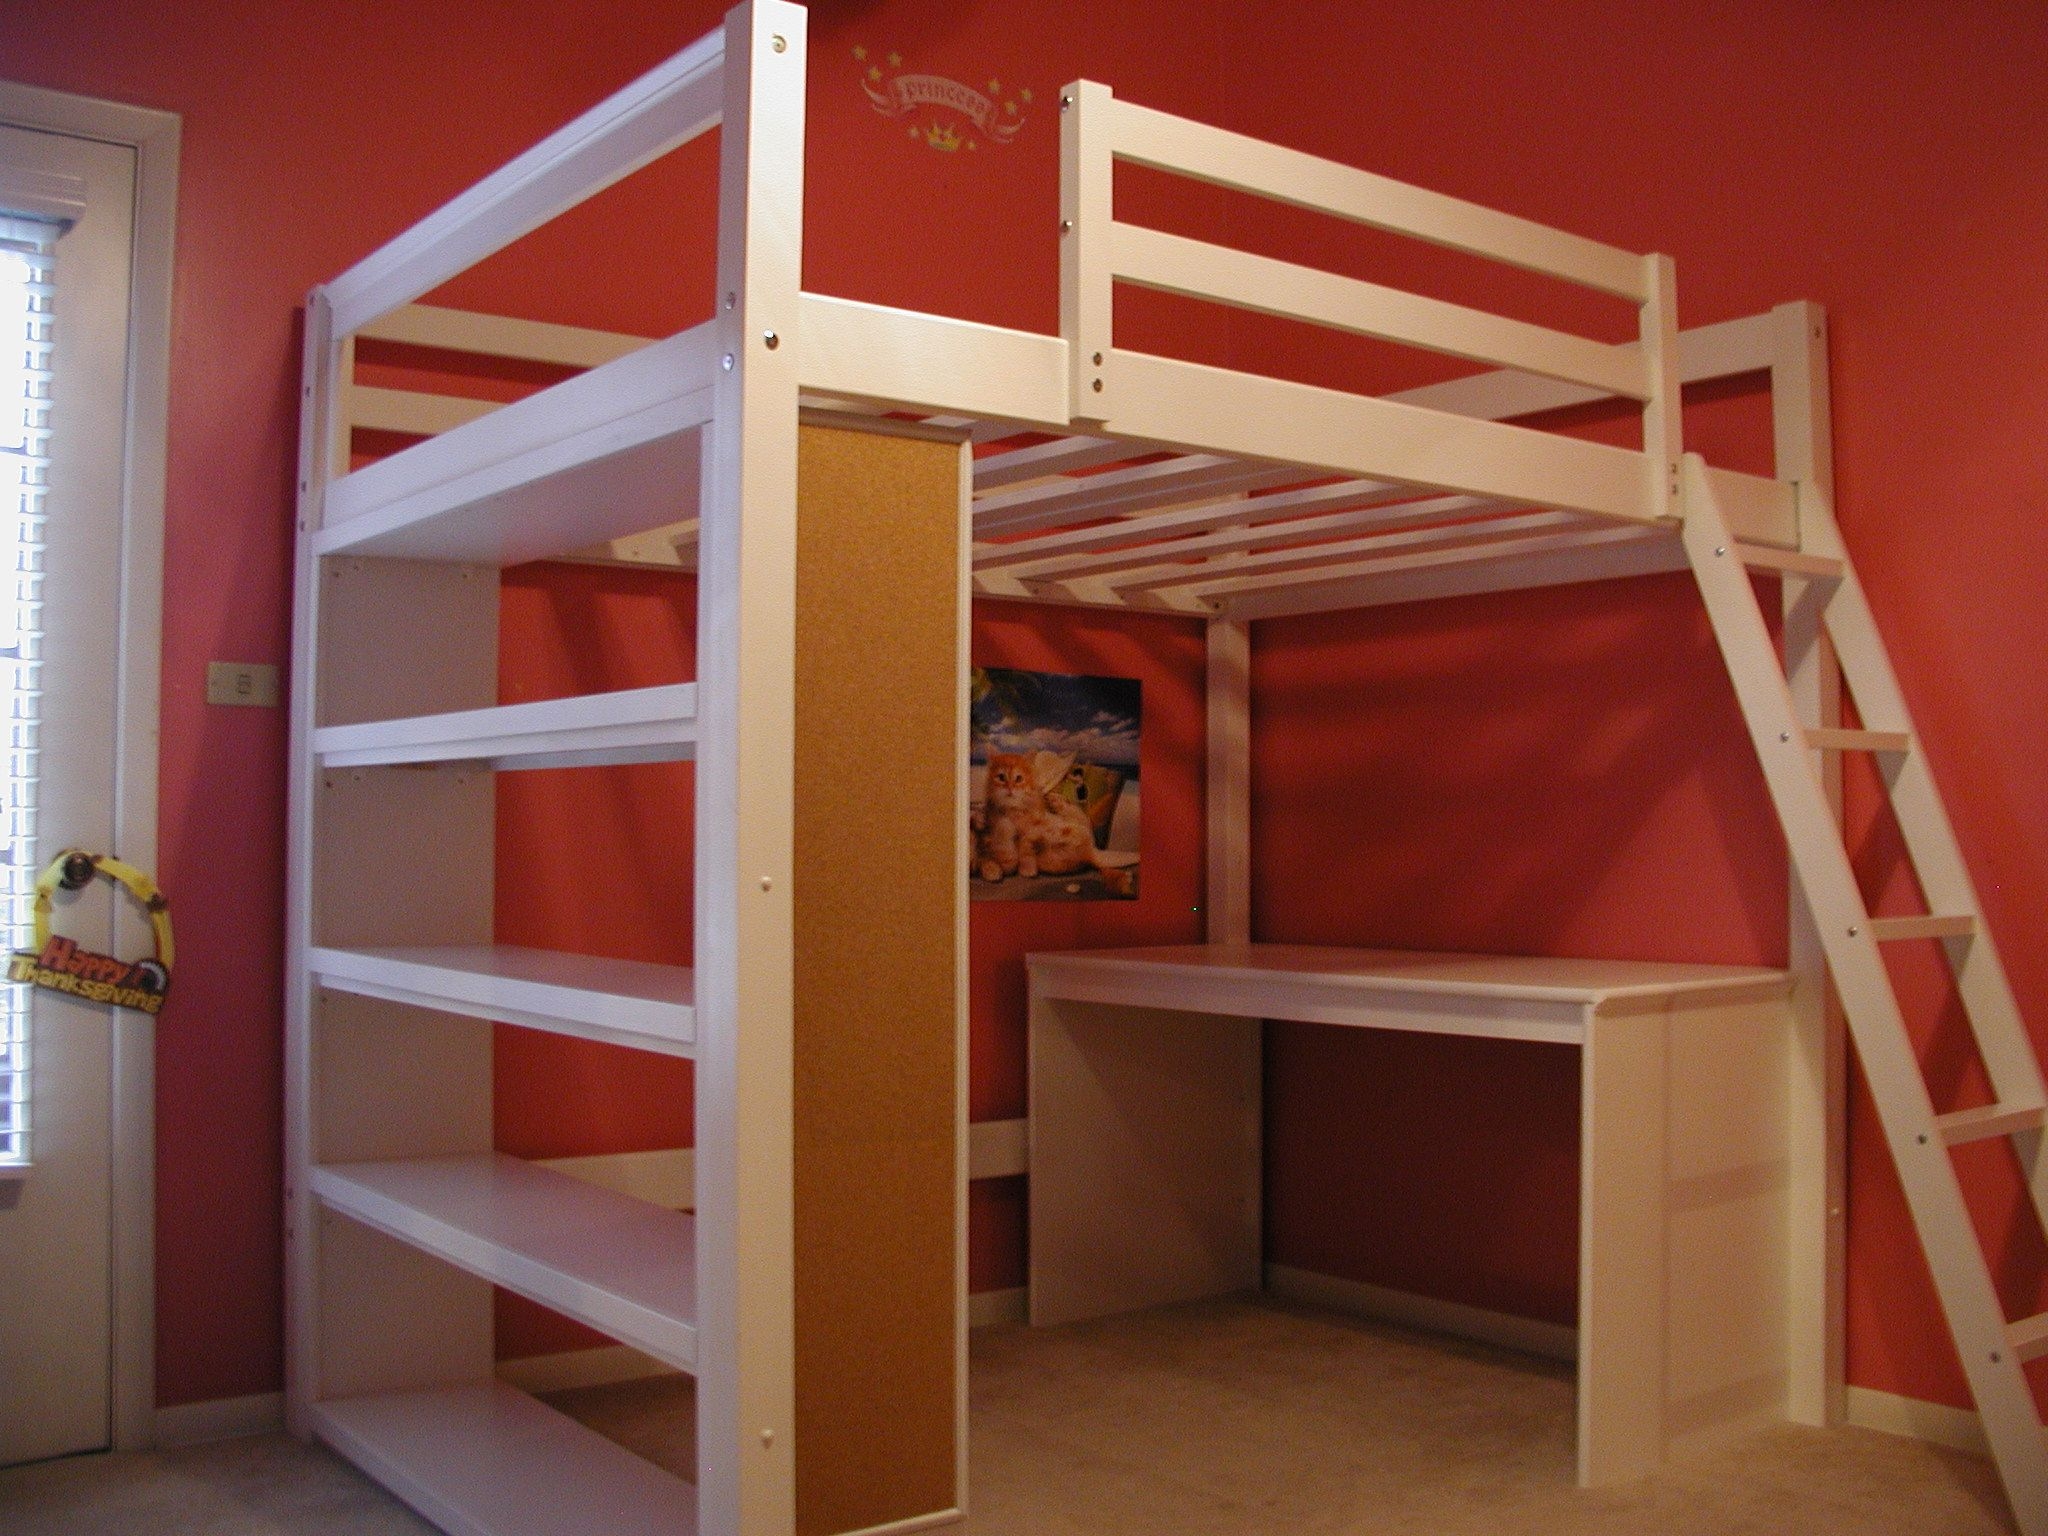 small white bunk beds